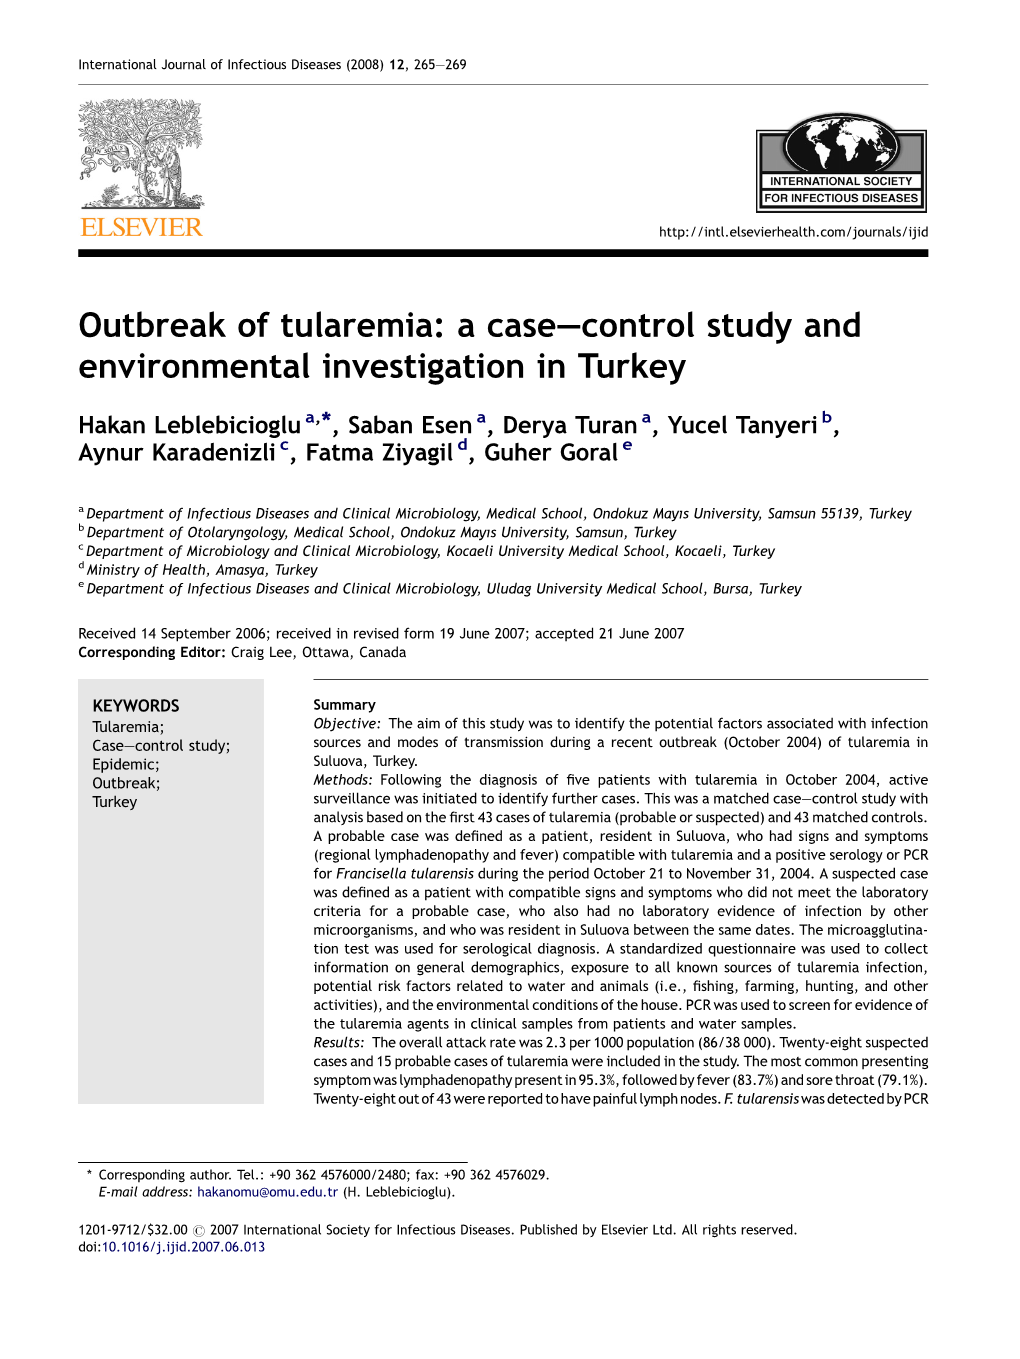 Outbreak of Tularemia: a Case—Control Study and Environmental Investigation in Turkey